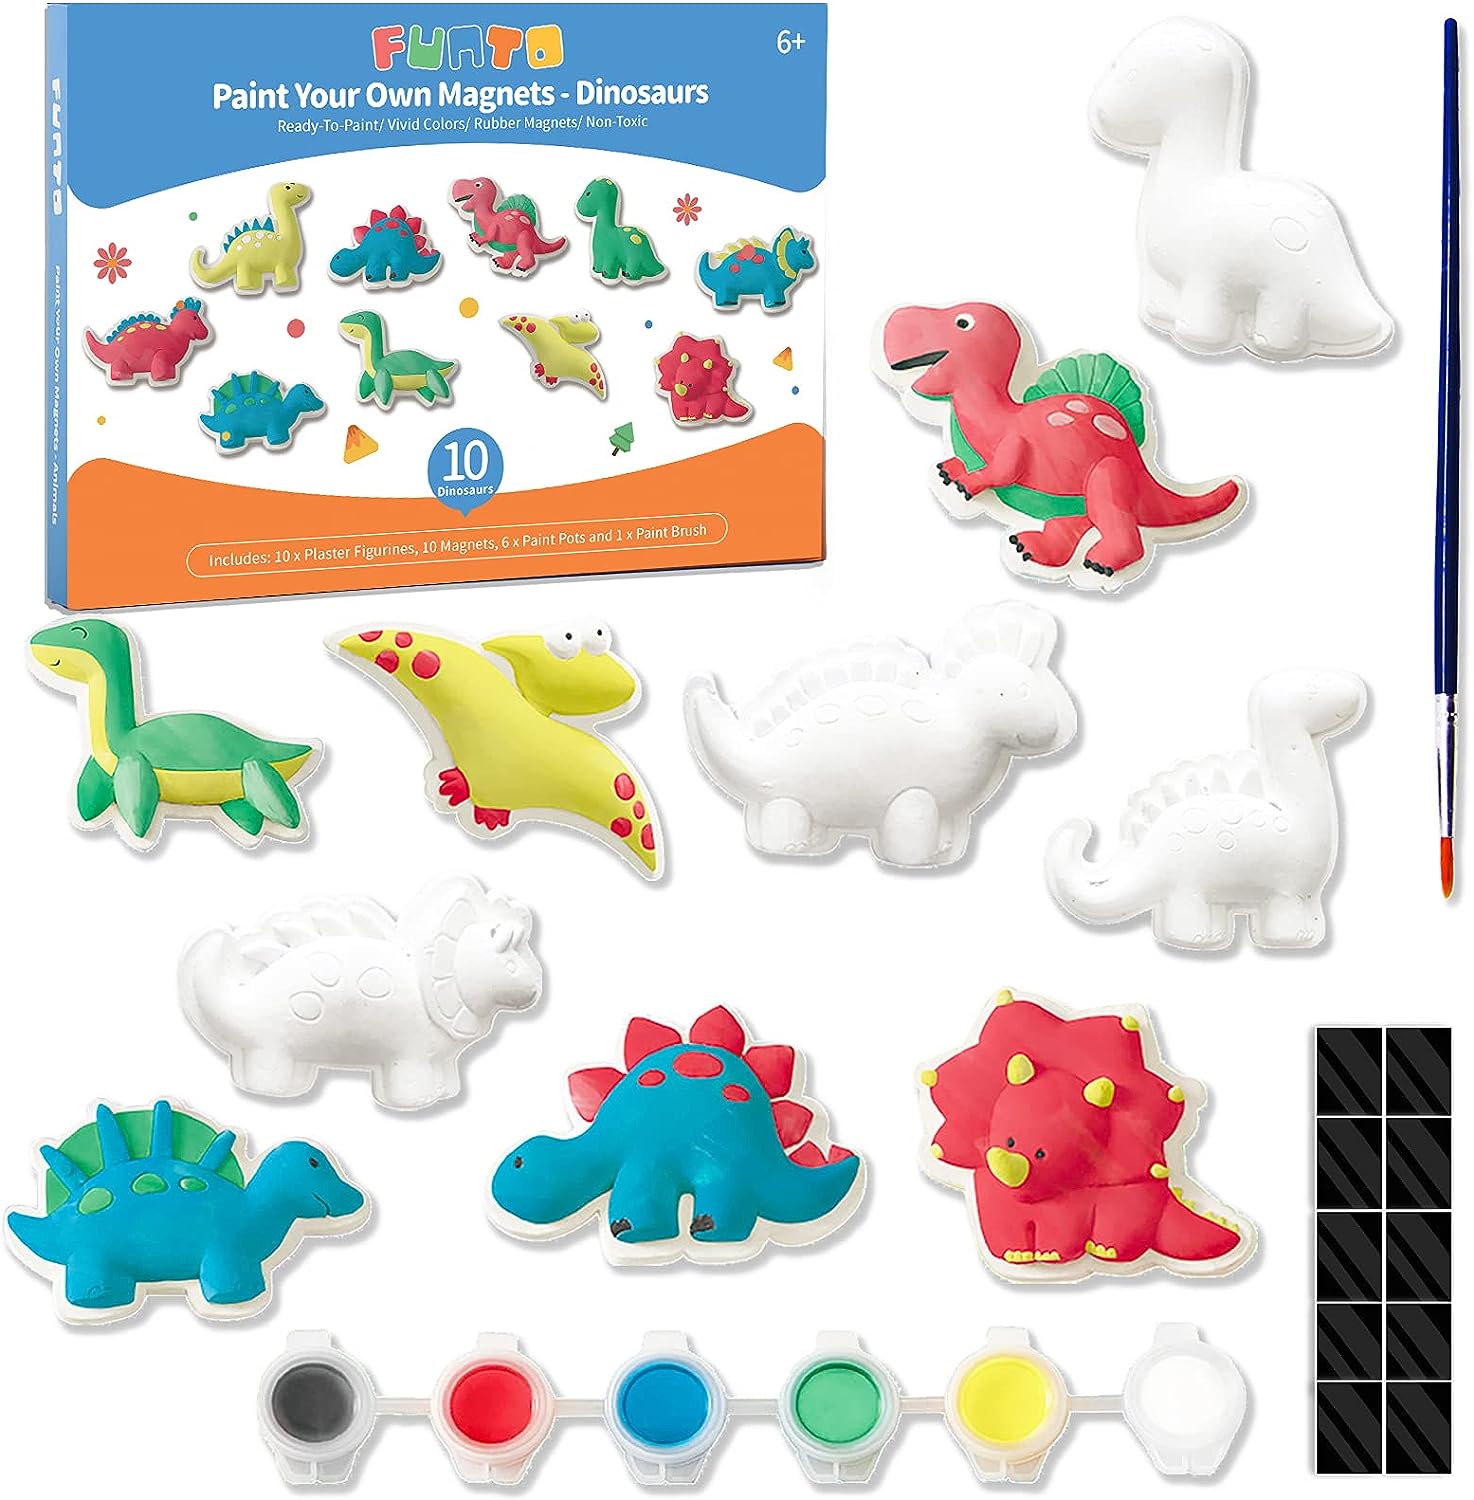 Funto Dinosaur Painting Kit for Kids, Paint Your Own [...]